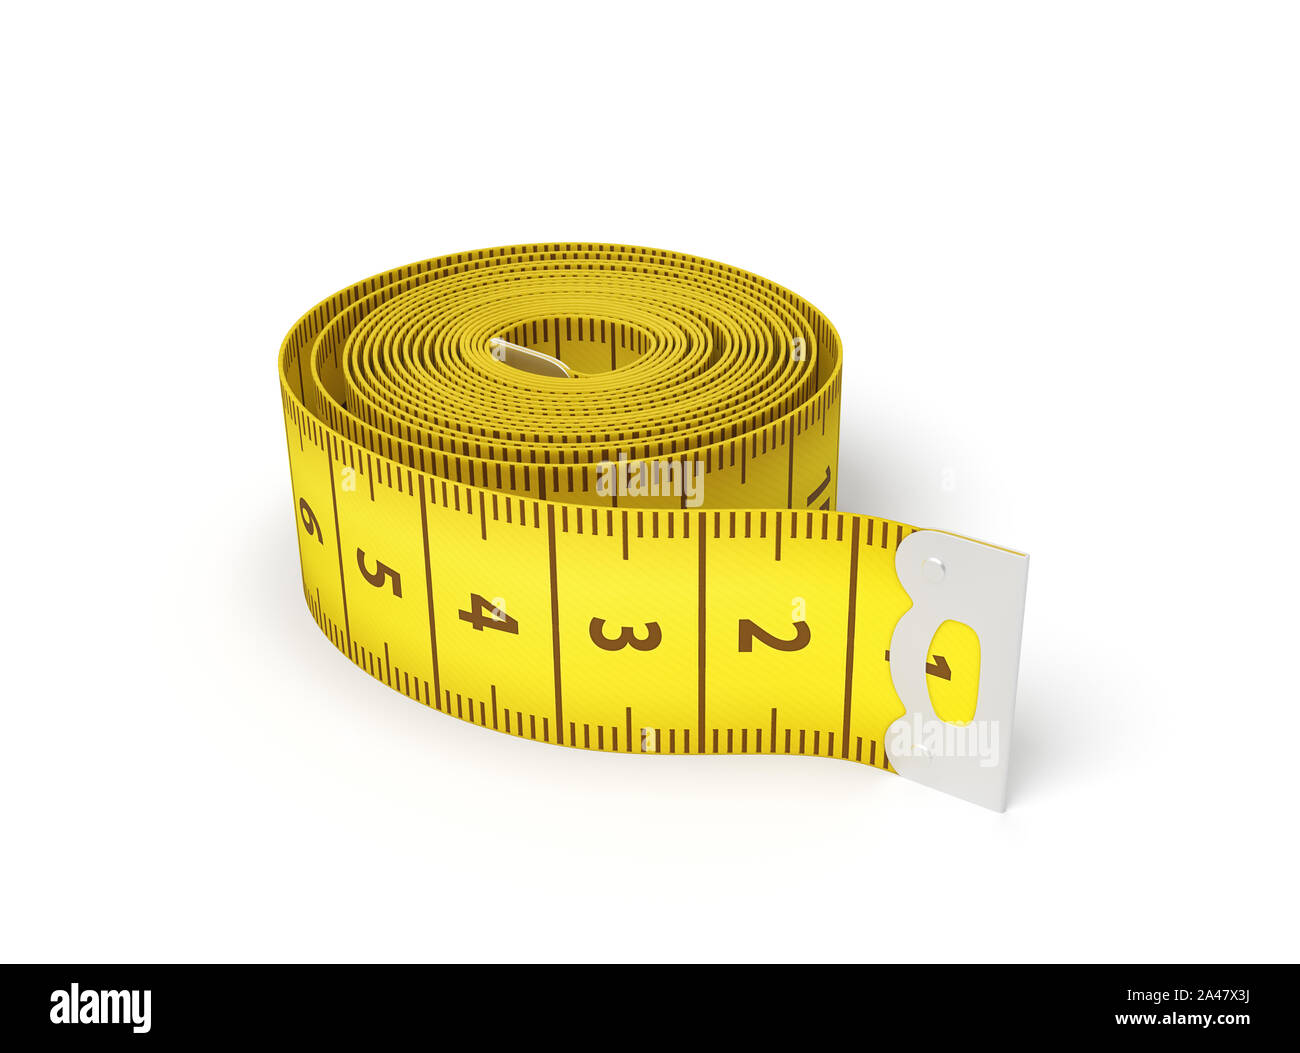 https://c8.alamy.com/comp/2A47X3J/3d-rendering-of-a-yellow-flexible-sewing-tape-measure-in-a-complete-unwound-state-on-a-white-background-long-tape-compact-measuring-tool-getting-ex-2A47X3J.jpg